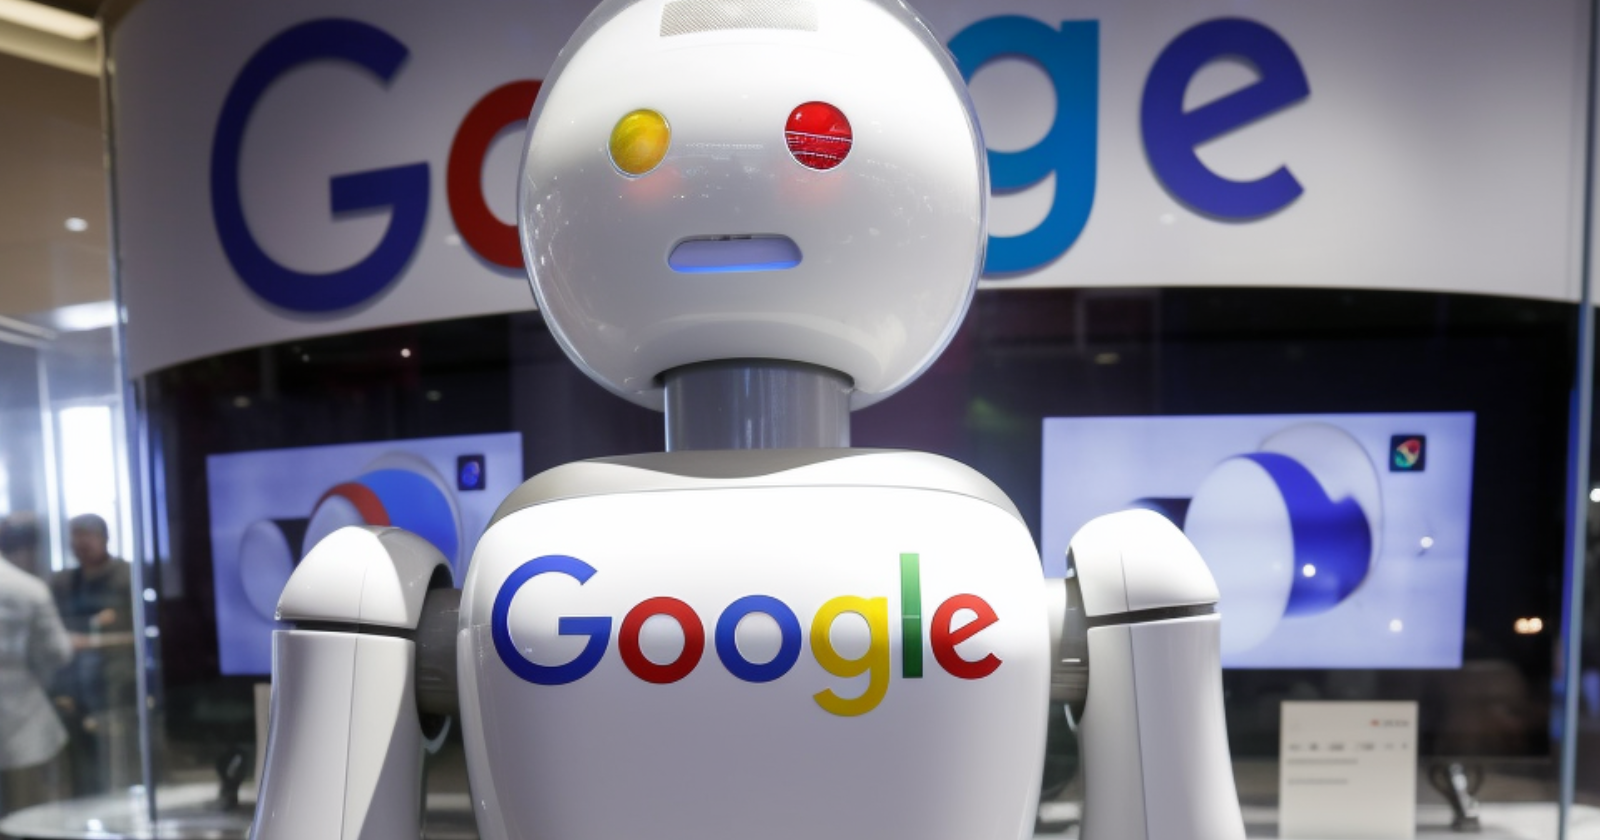 Google is struggling to keep up with AI-powered search competitors